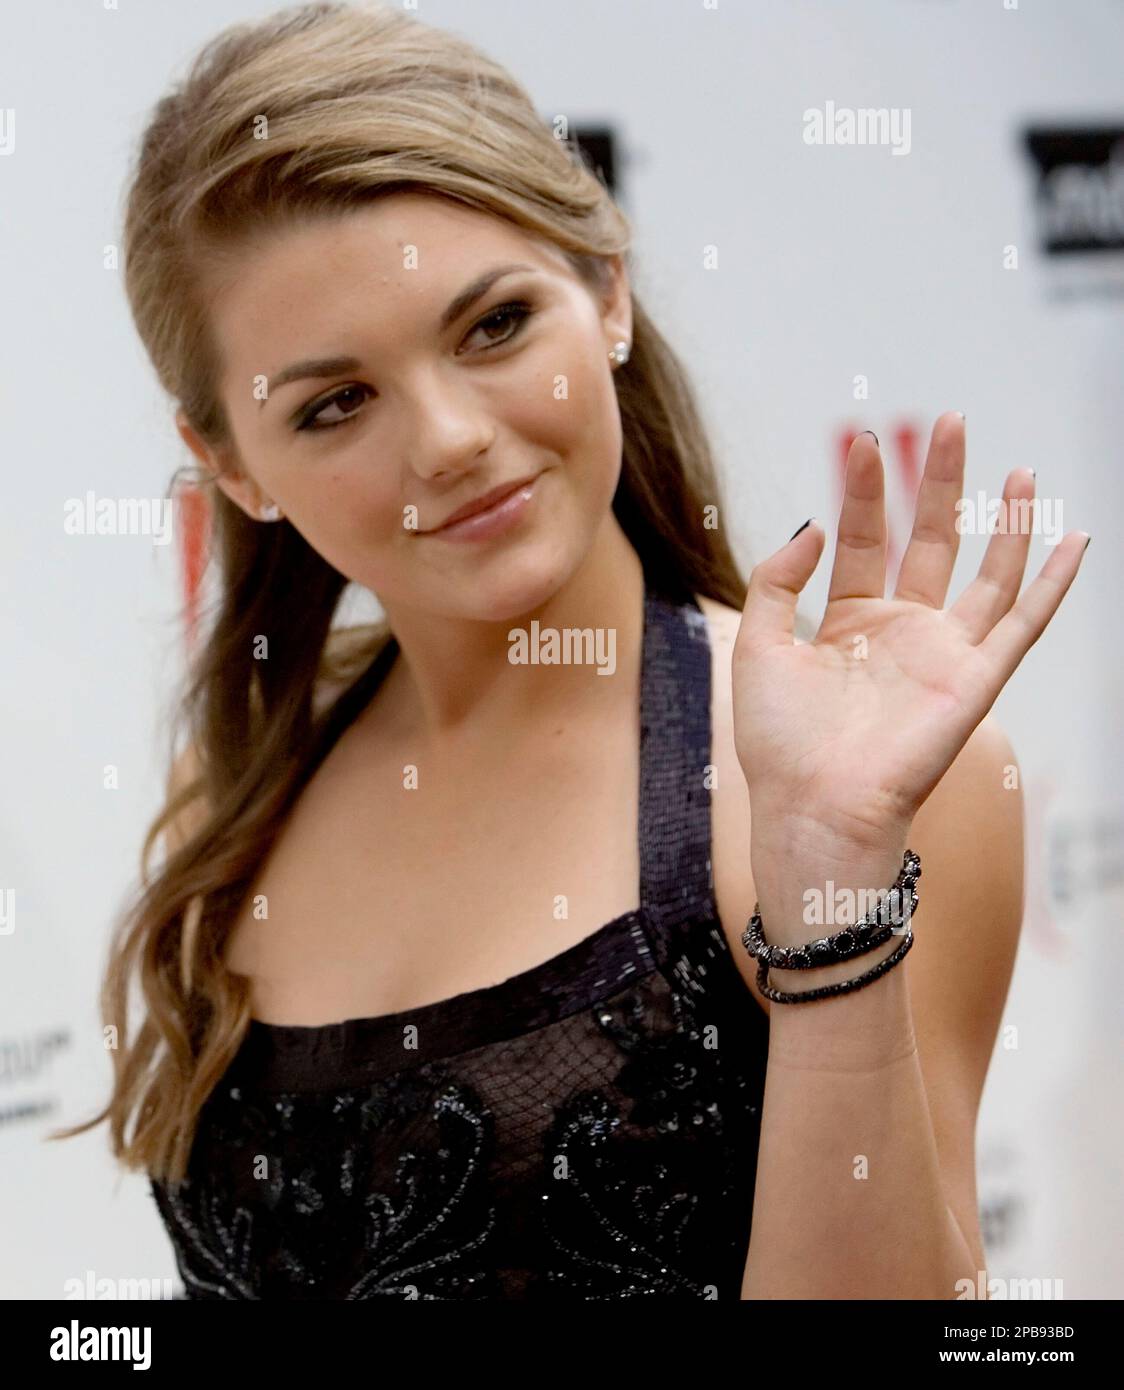 ** FILE ** The fate of Bree, the Web's "LonelyGirl15" star portrayed by Jessica Lee Rose of New Zealand, seen here in a file photo taken in New York on June 5, 2007, will be revealed Friday, Aug. 3, 2007, when the successful and influential show ends its first season. (AP Photo/Stephen Chernin) Stock Photo